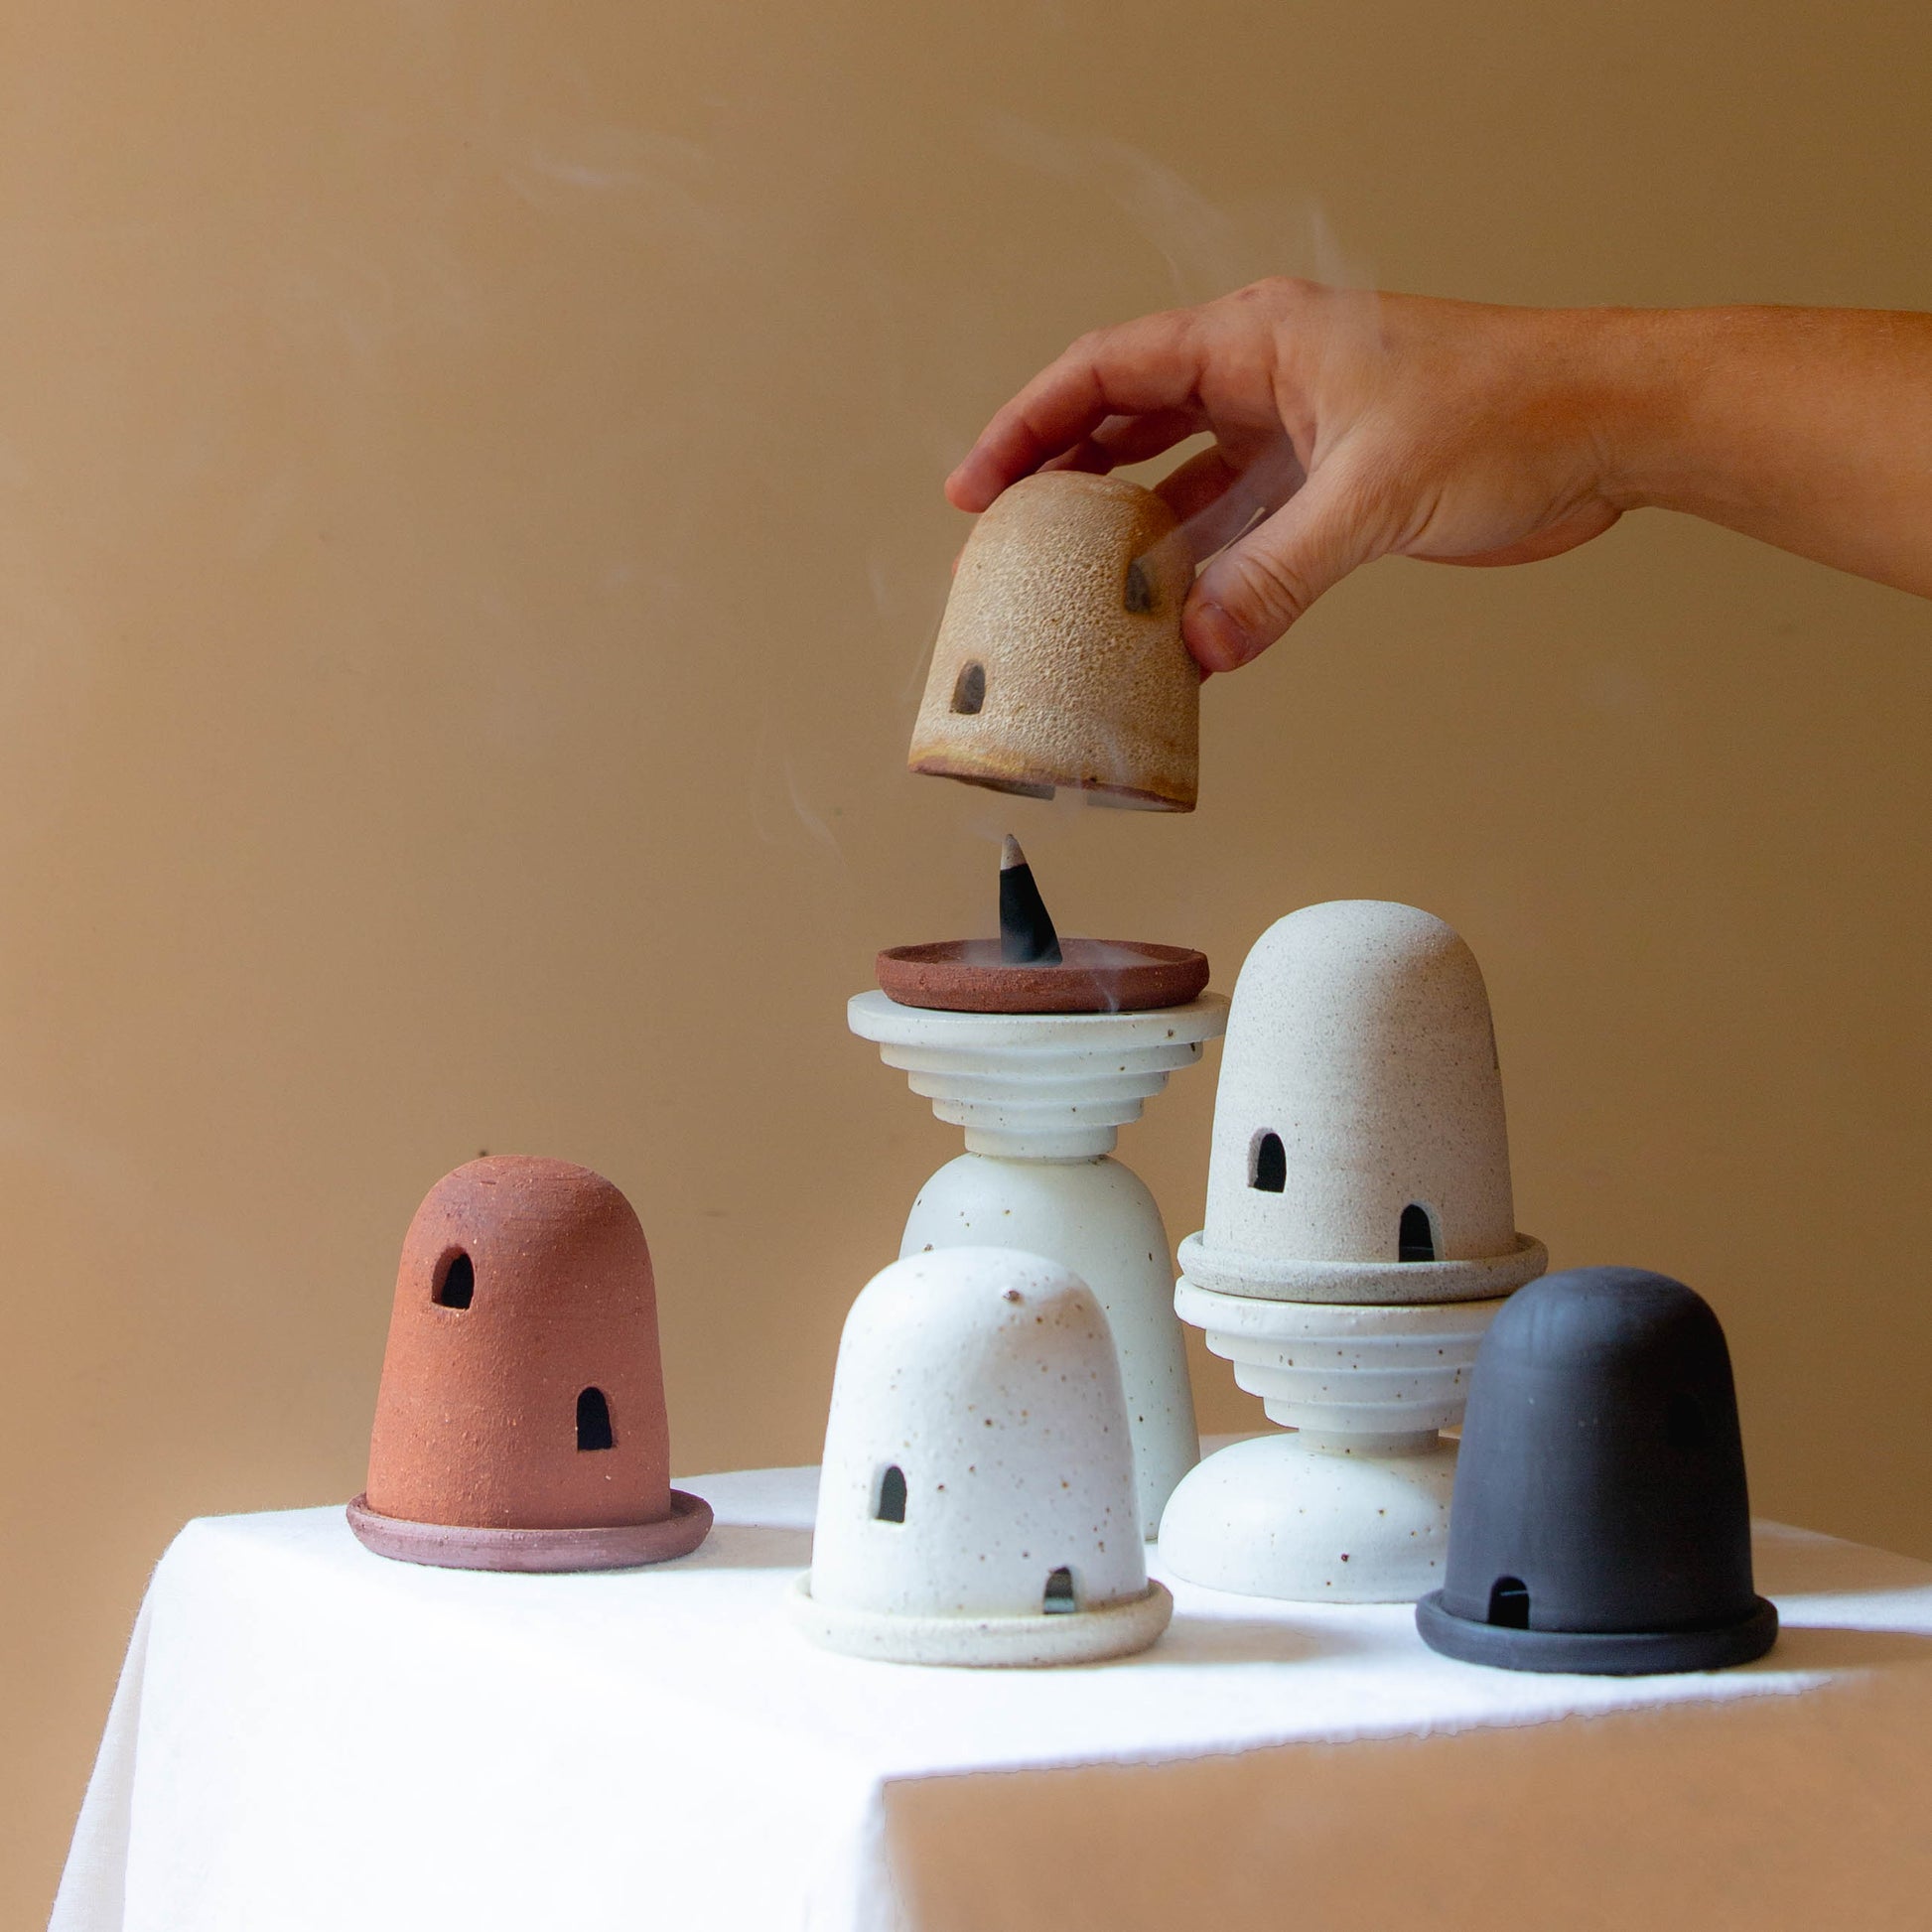 Five dome burners in terracotta, rust lava, speckled cream, grey, and black. A hand carefully holds one dome and smoke is billowing out while a incense cone burns on the dish. The dome burners have a smooth dome top with hand carved windows and sit on a dish.